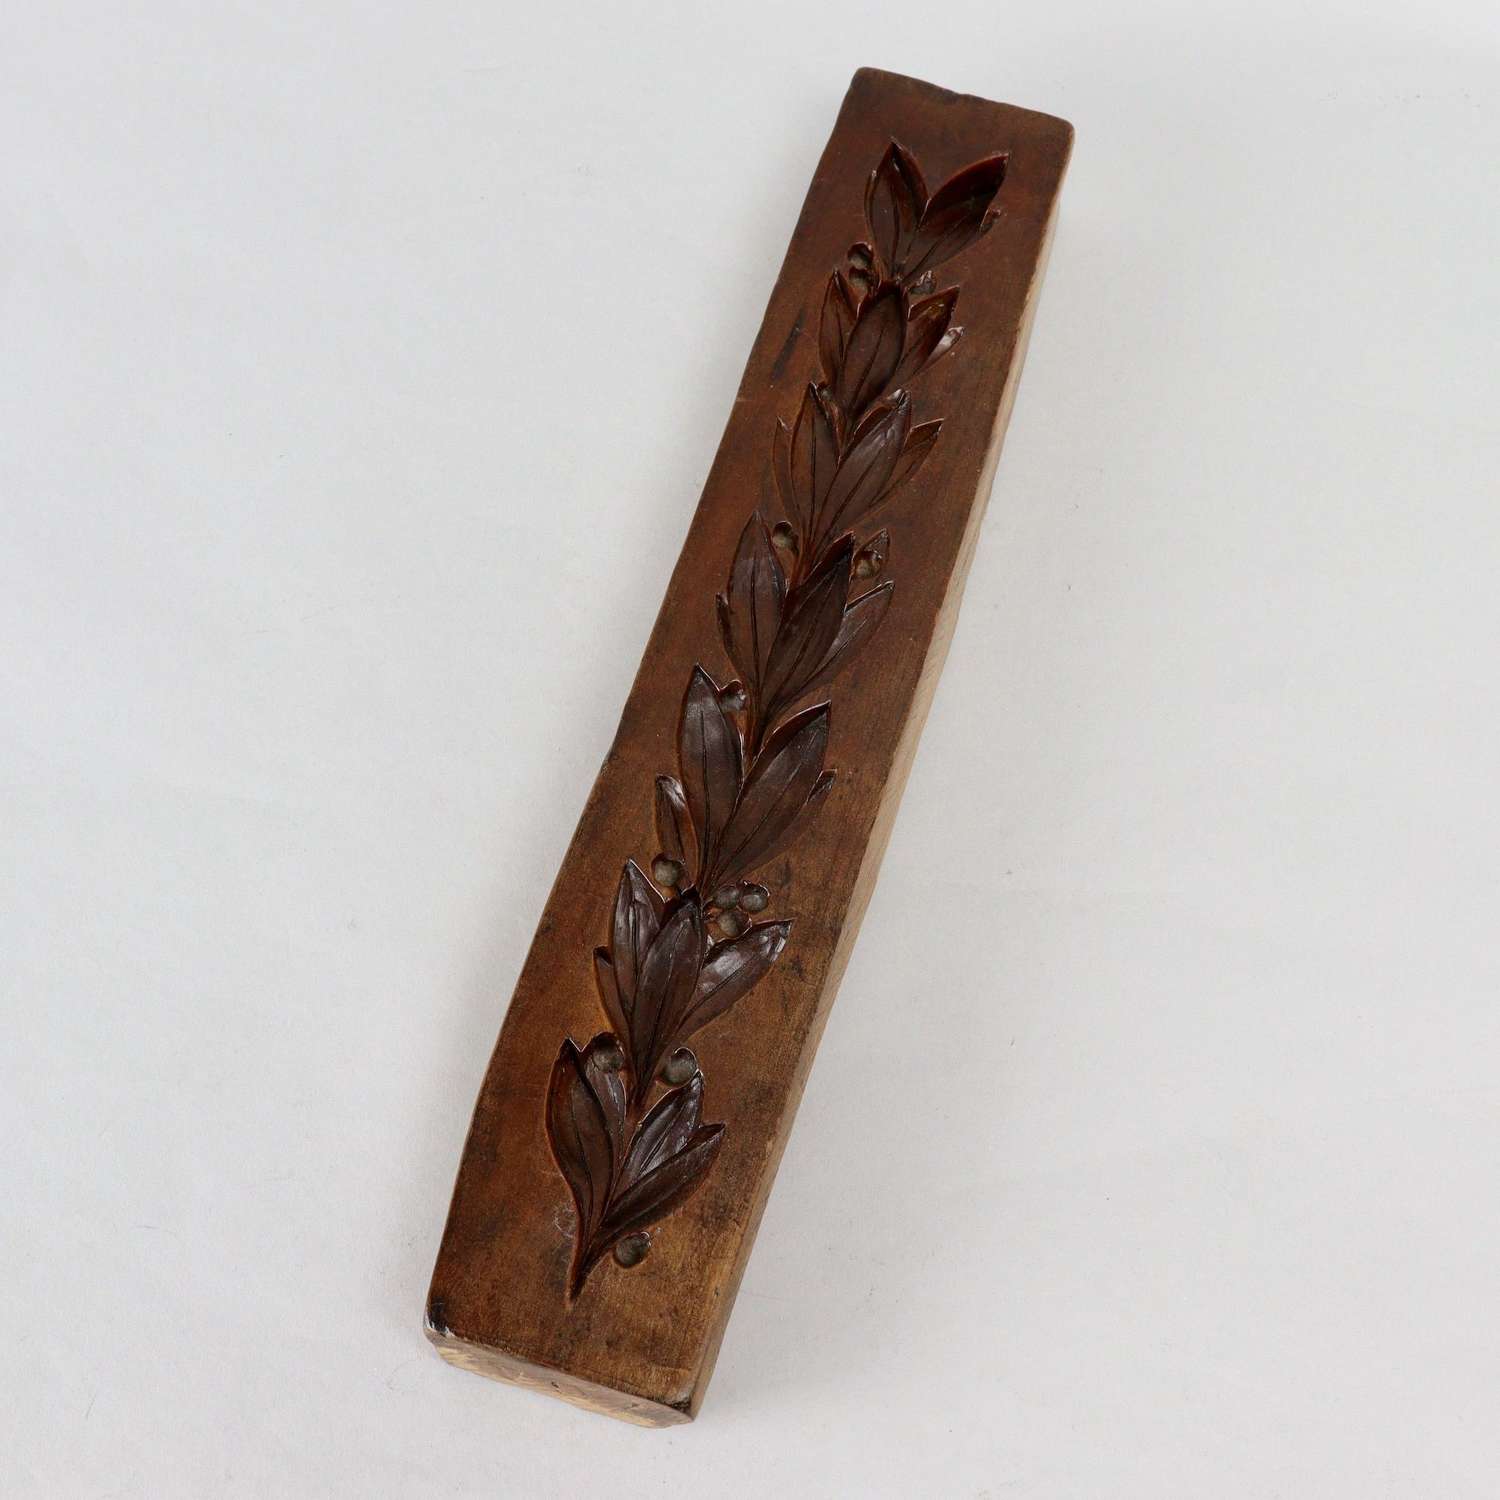 Fruitwood Mould Carved with Laurel